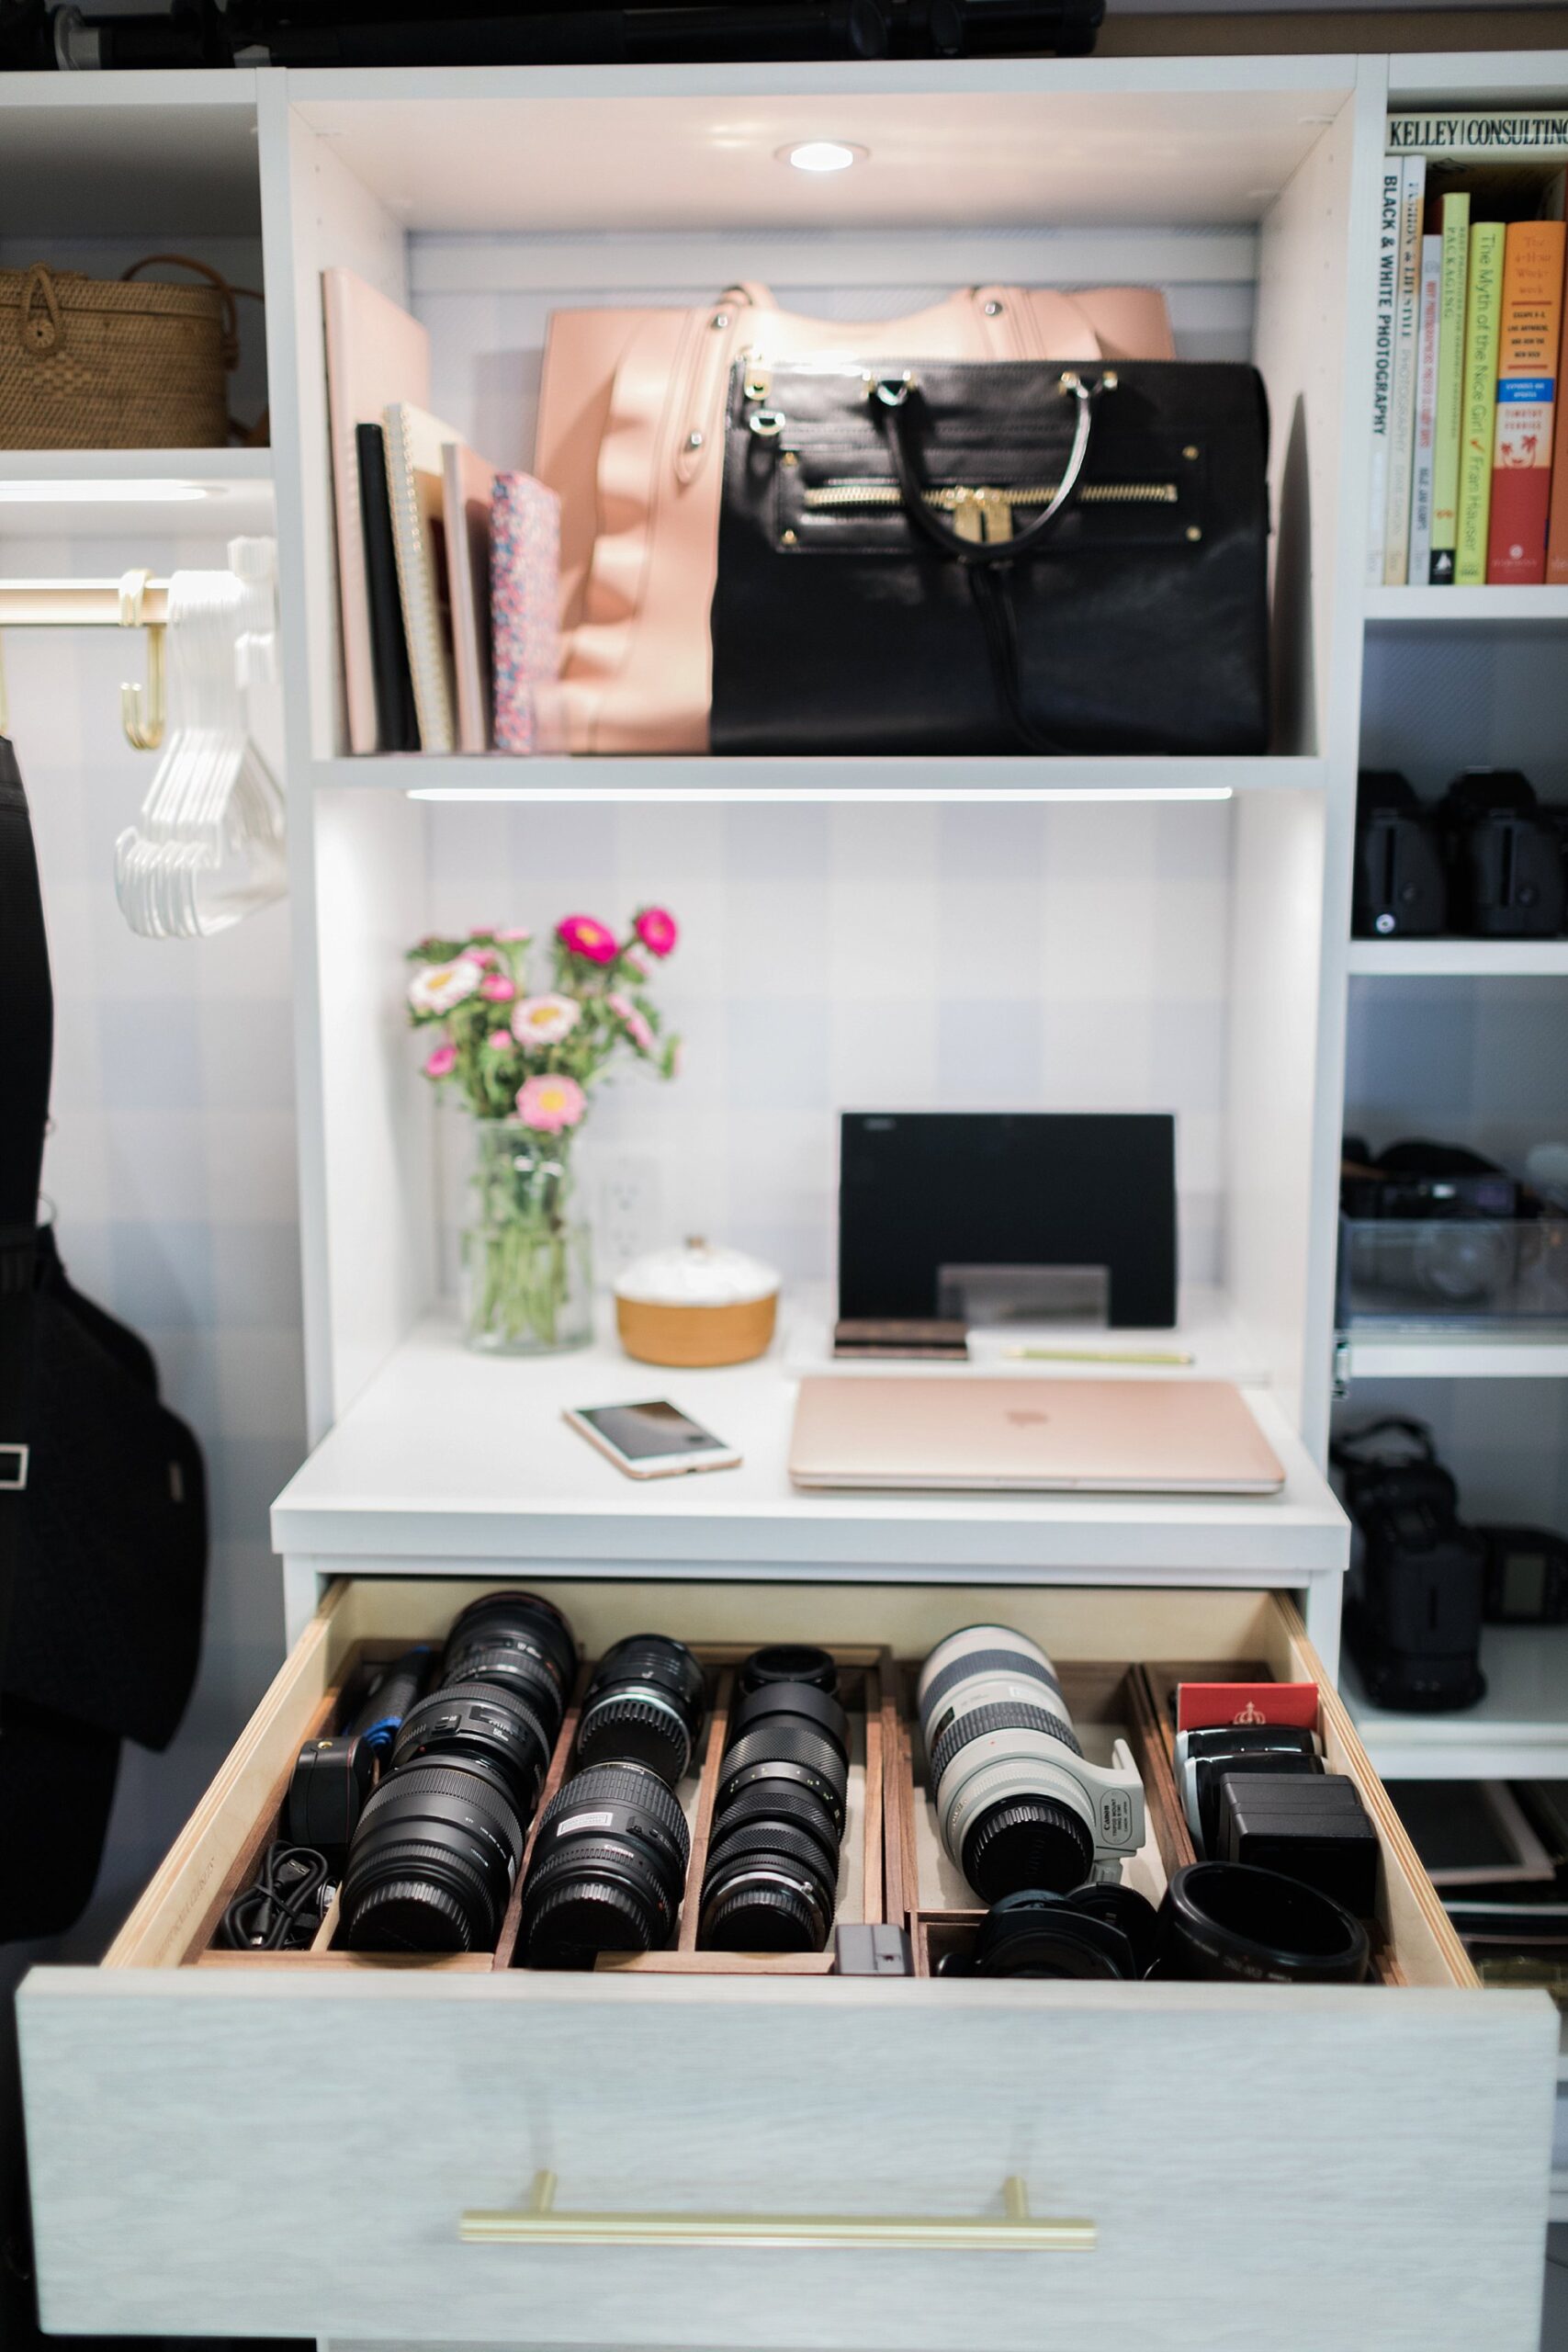 camera lens drawer lens organization blogger photographer office closet and how to organize and store camera lenses